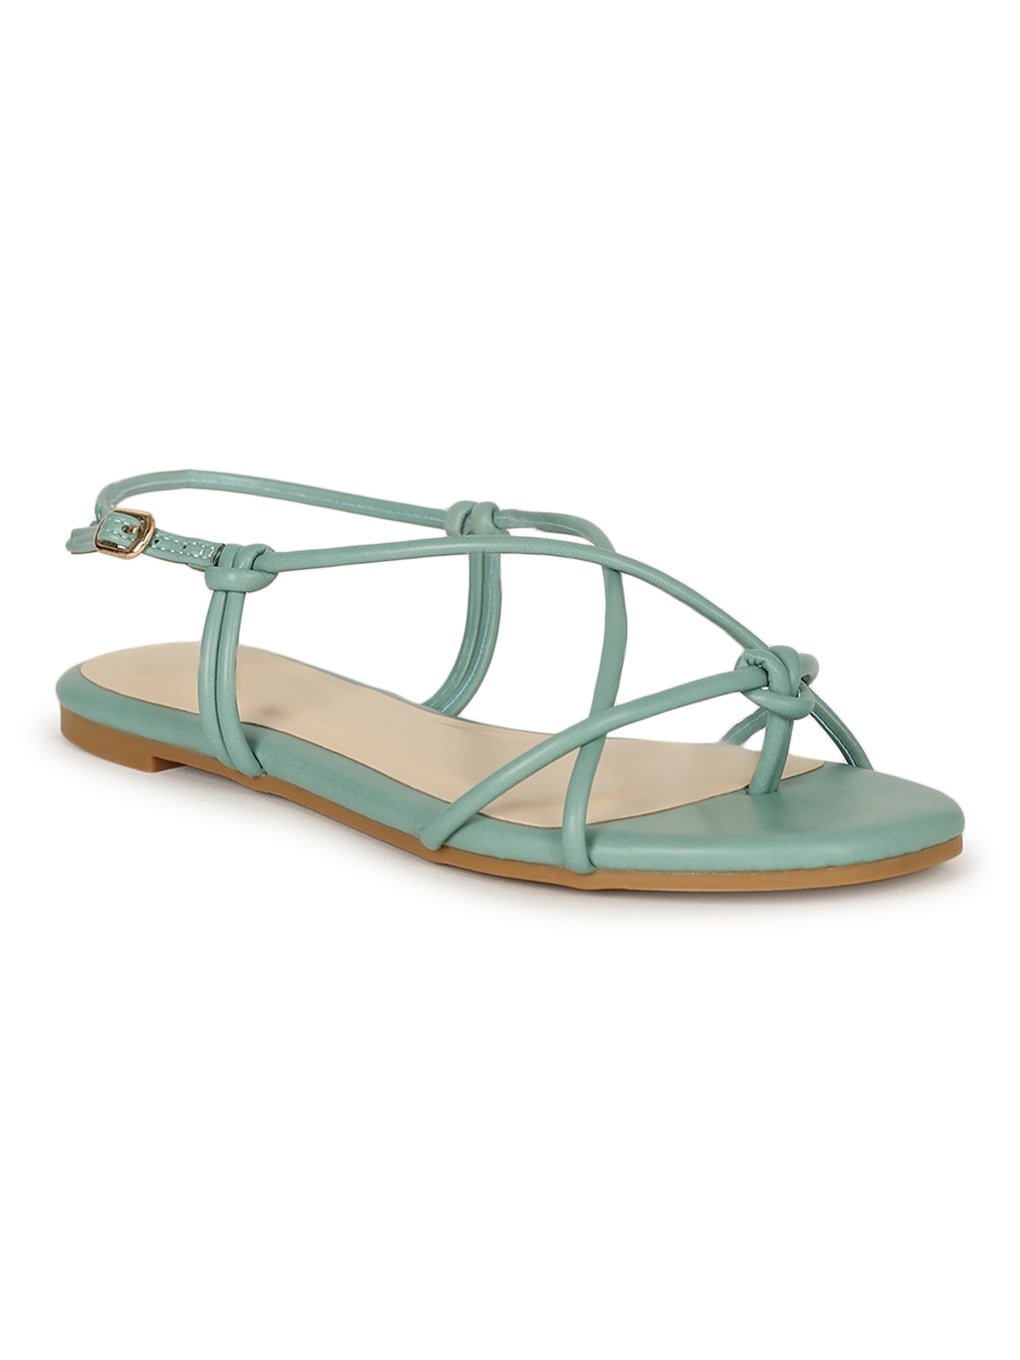 Bamboo Square Toe Knotted Strappy Slingback Flat Sandal 20243 - Walmart.com